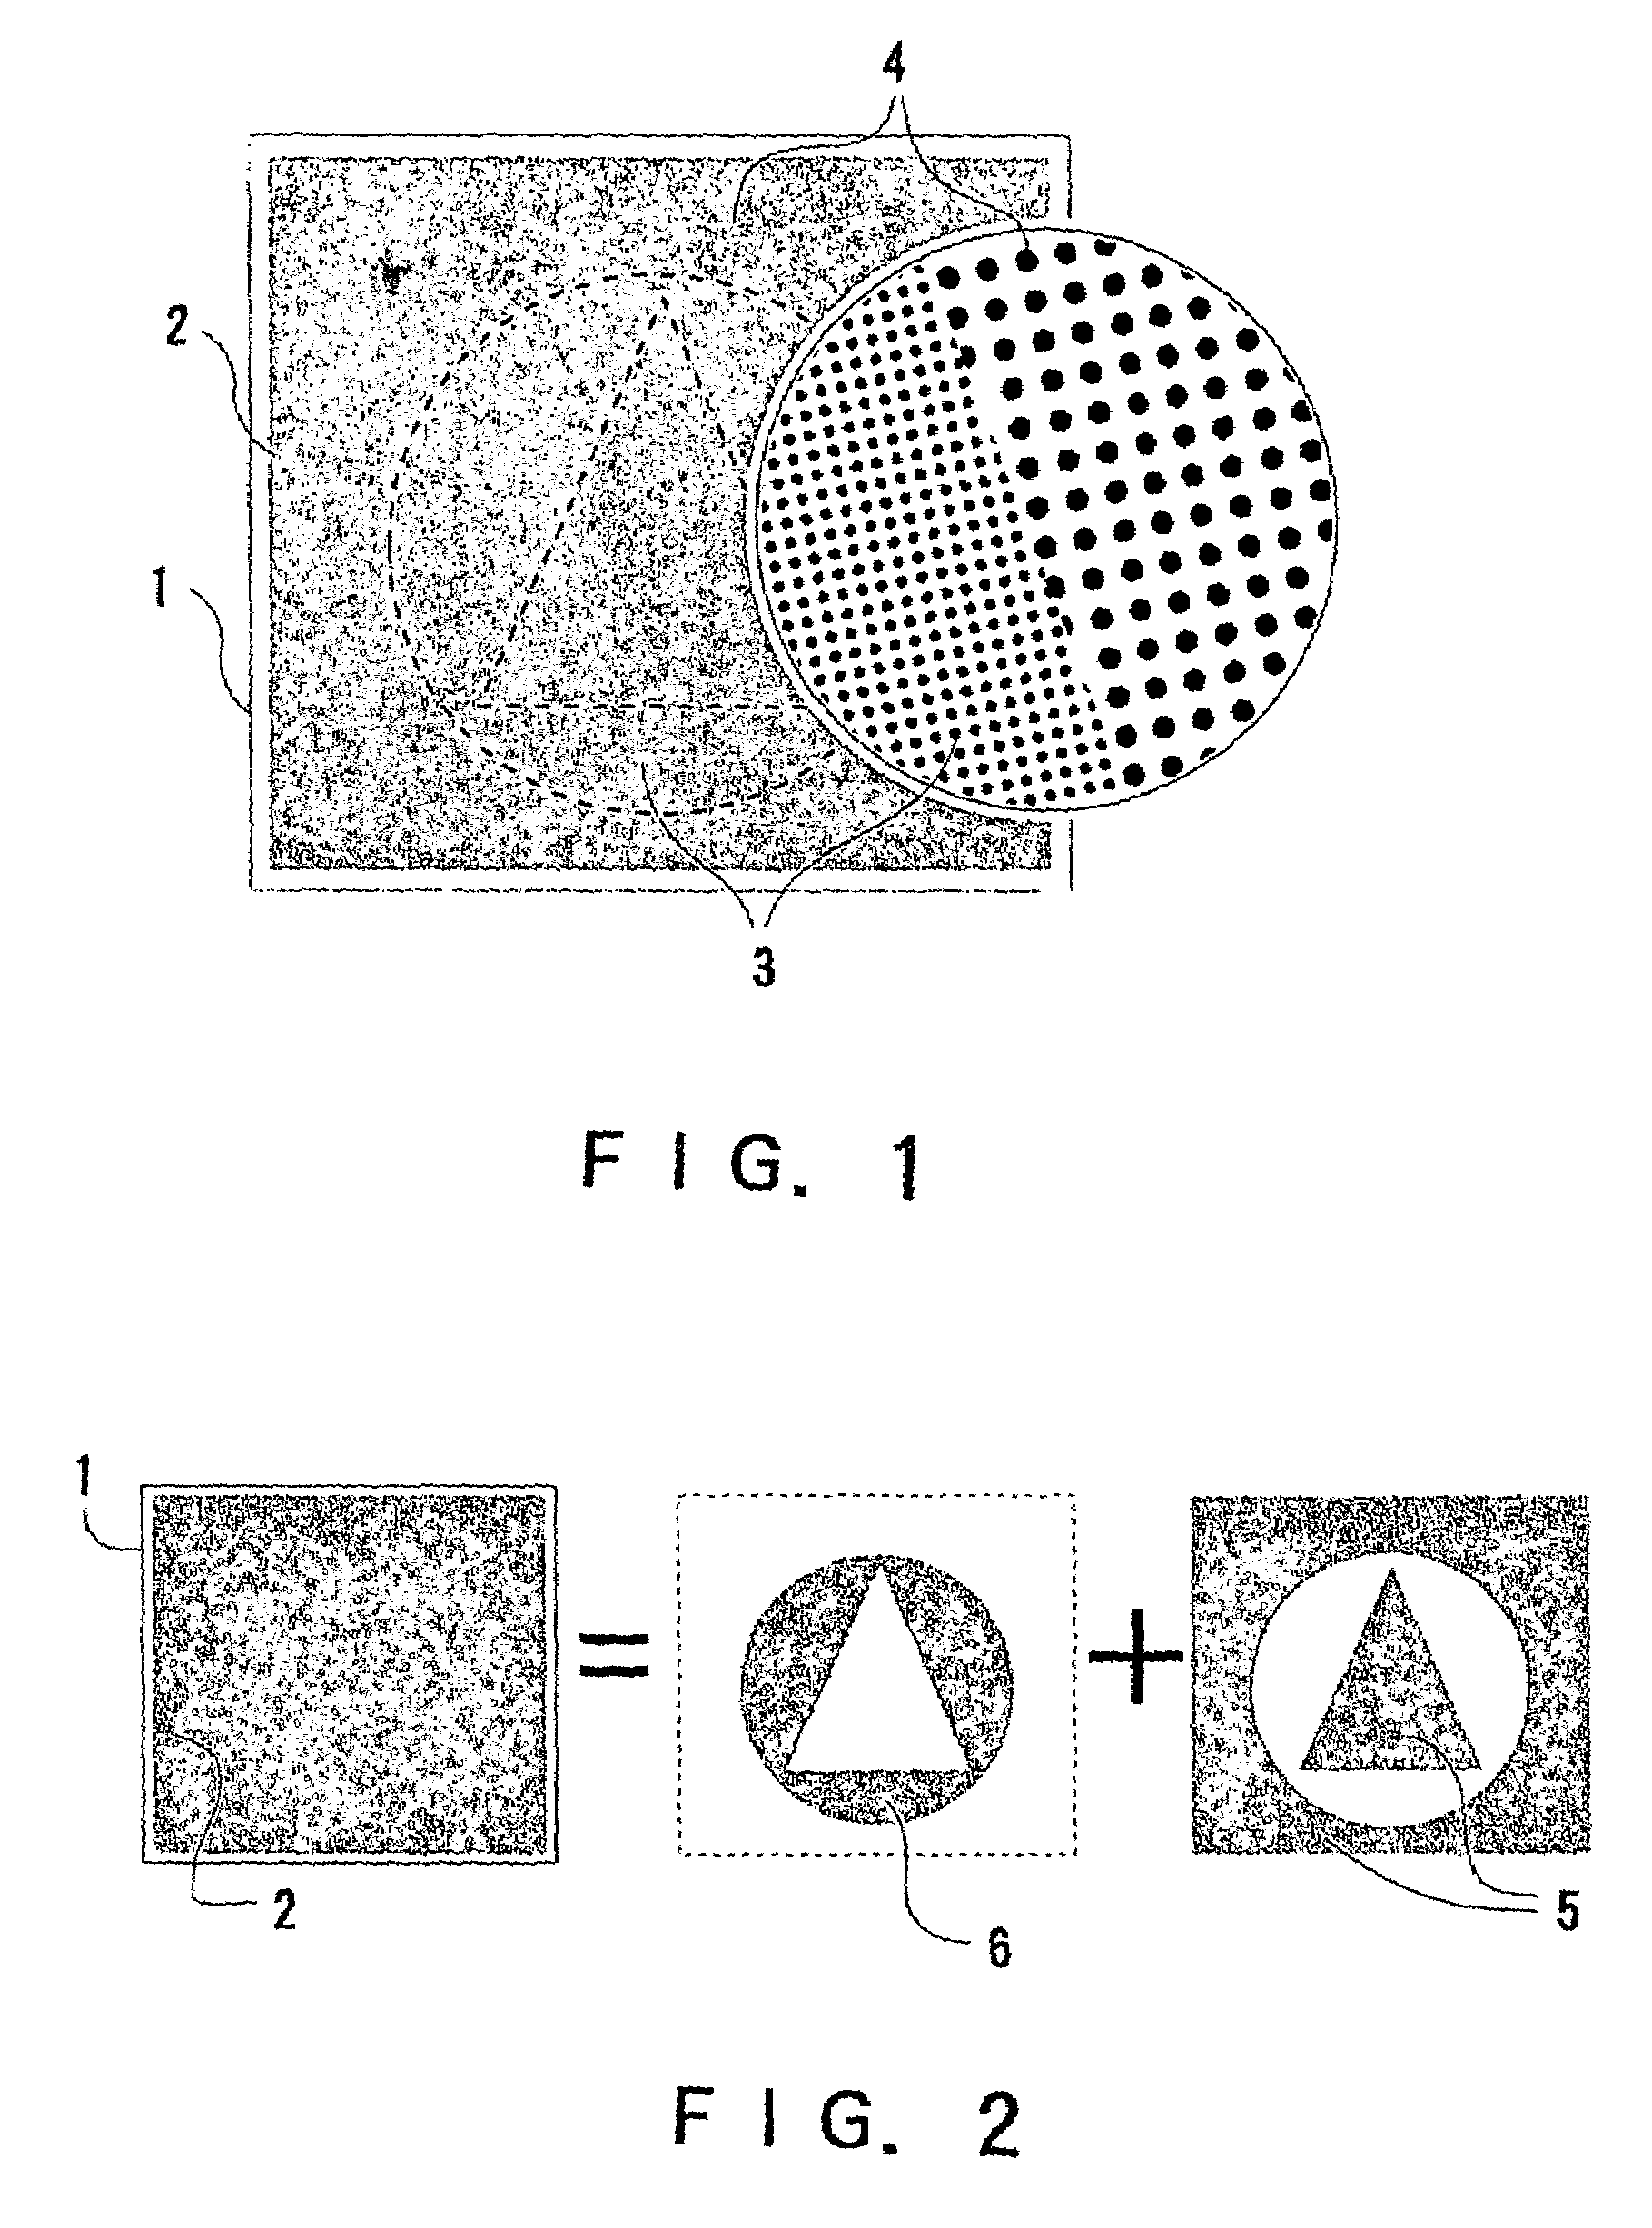 Authenticatable printed matter, and method for producing the same